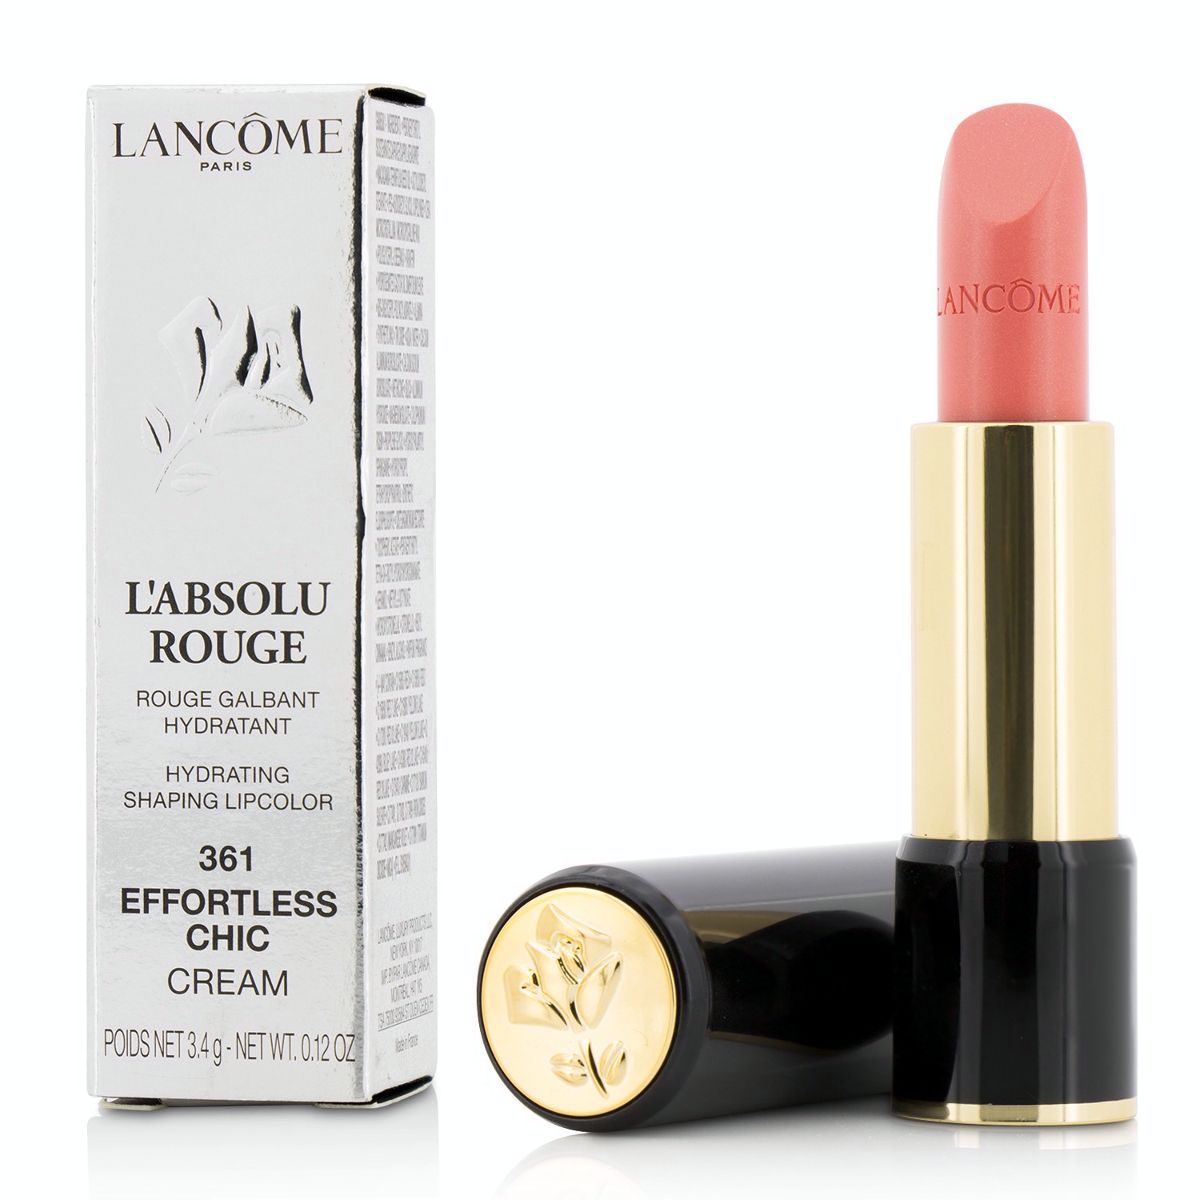 L Absolu Rouge Hydrating Shaping Lipcolor - # 361 Effortless Chic (Cream) Lancome Image